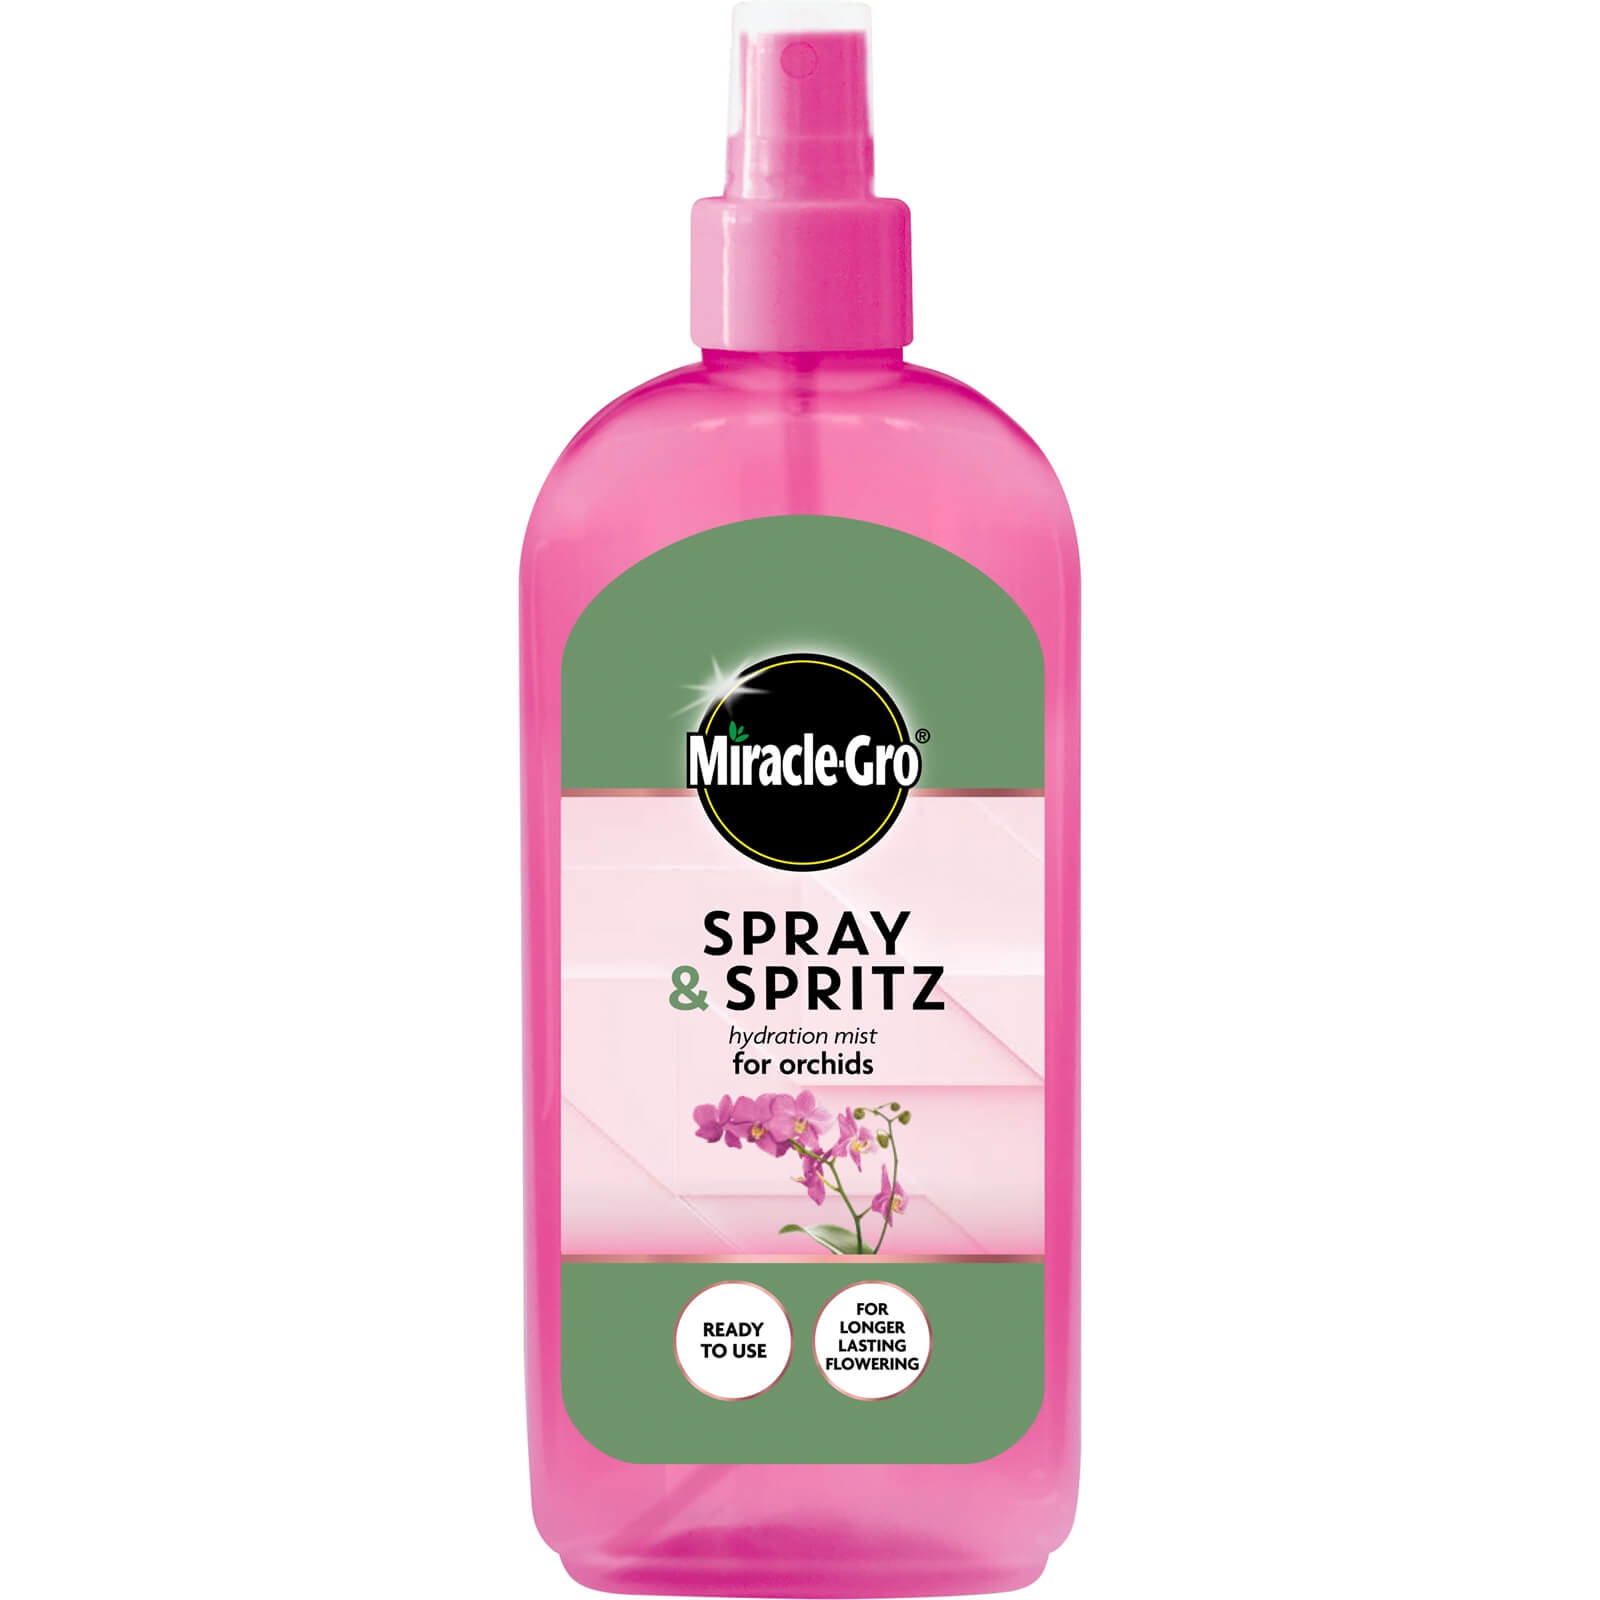 Photo of Miracle-gro Spray & Spritz Hydration Mist For Orchids - 300ml